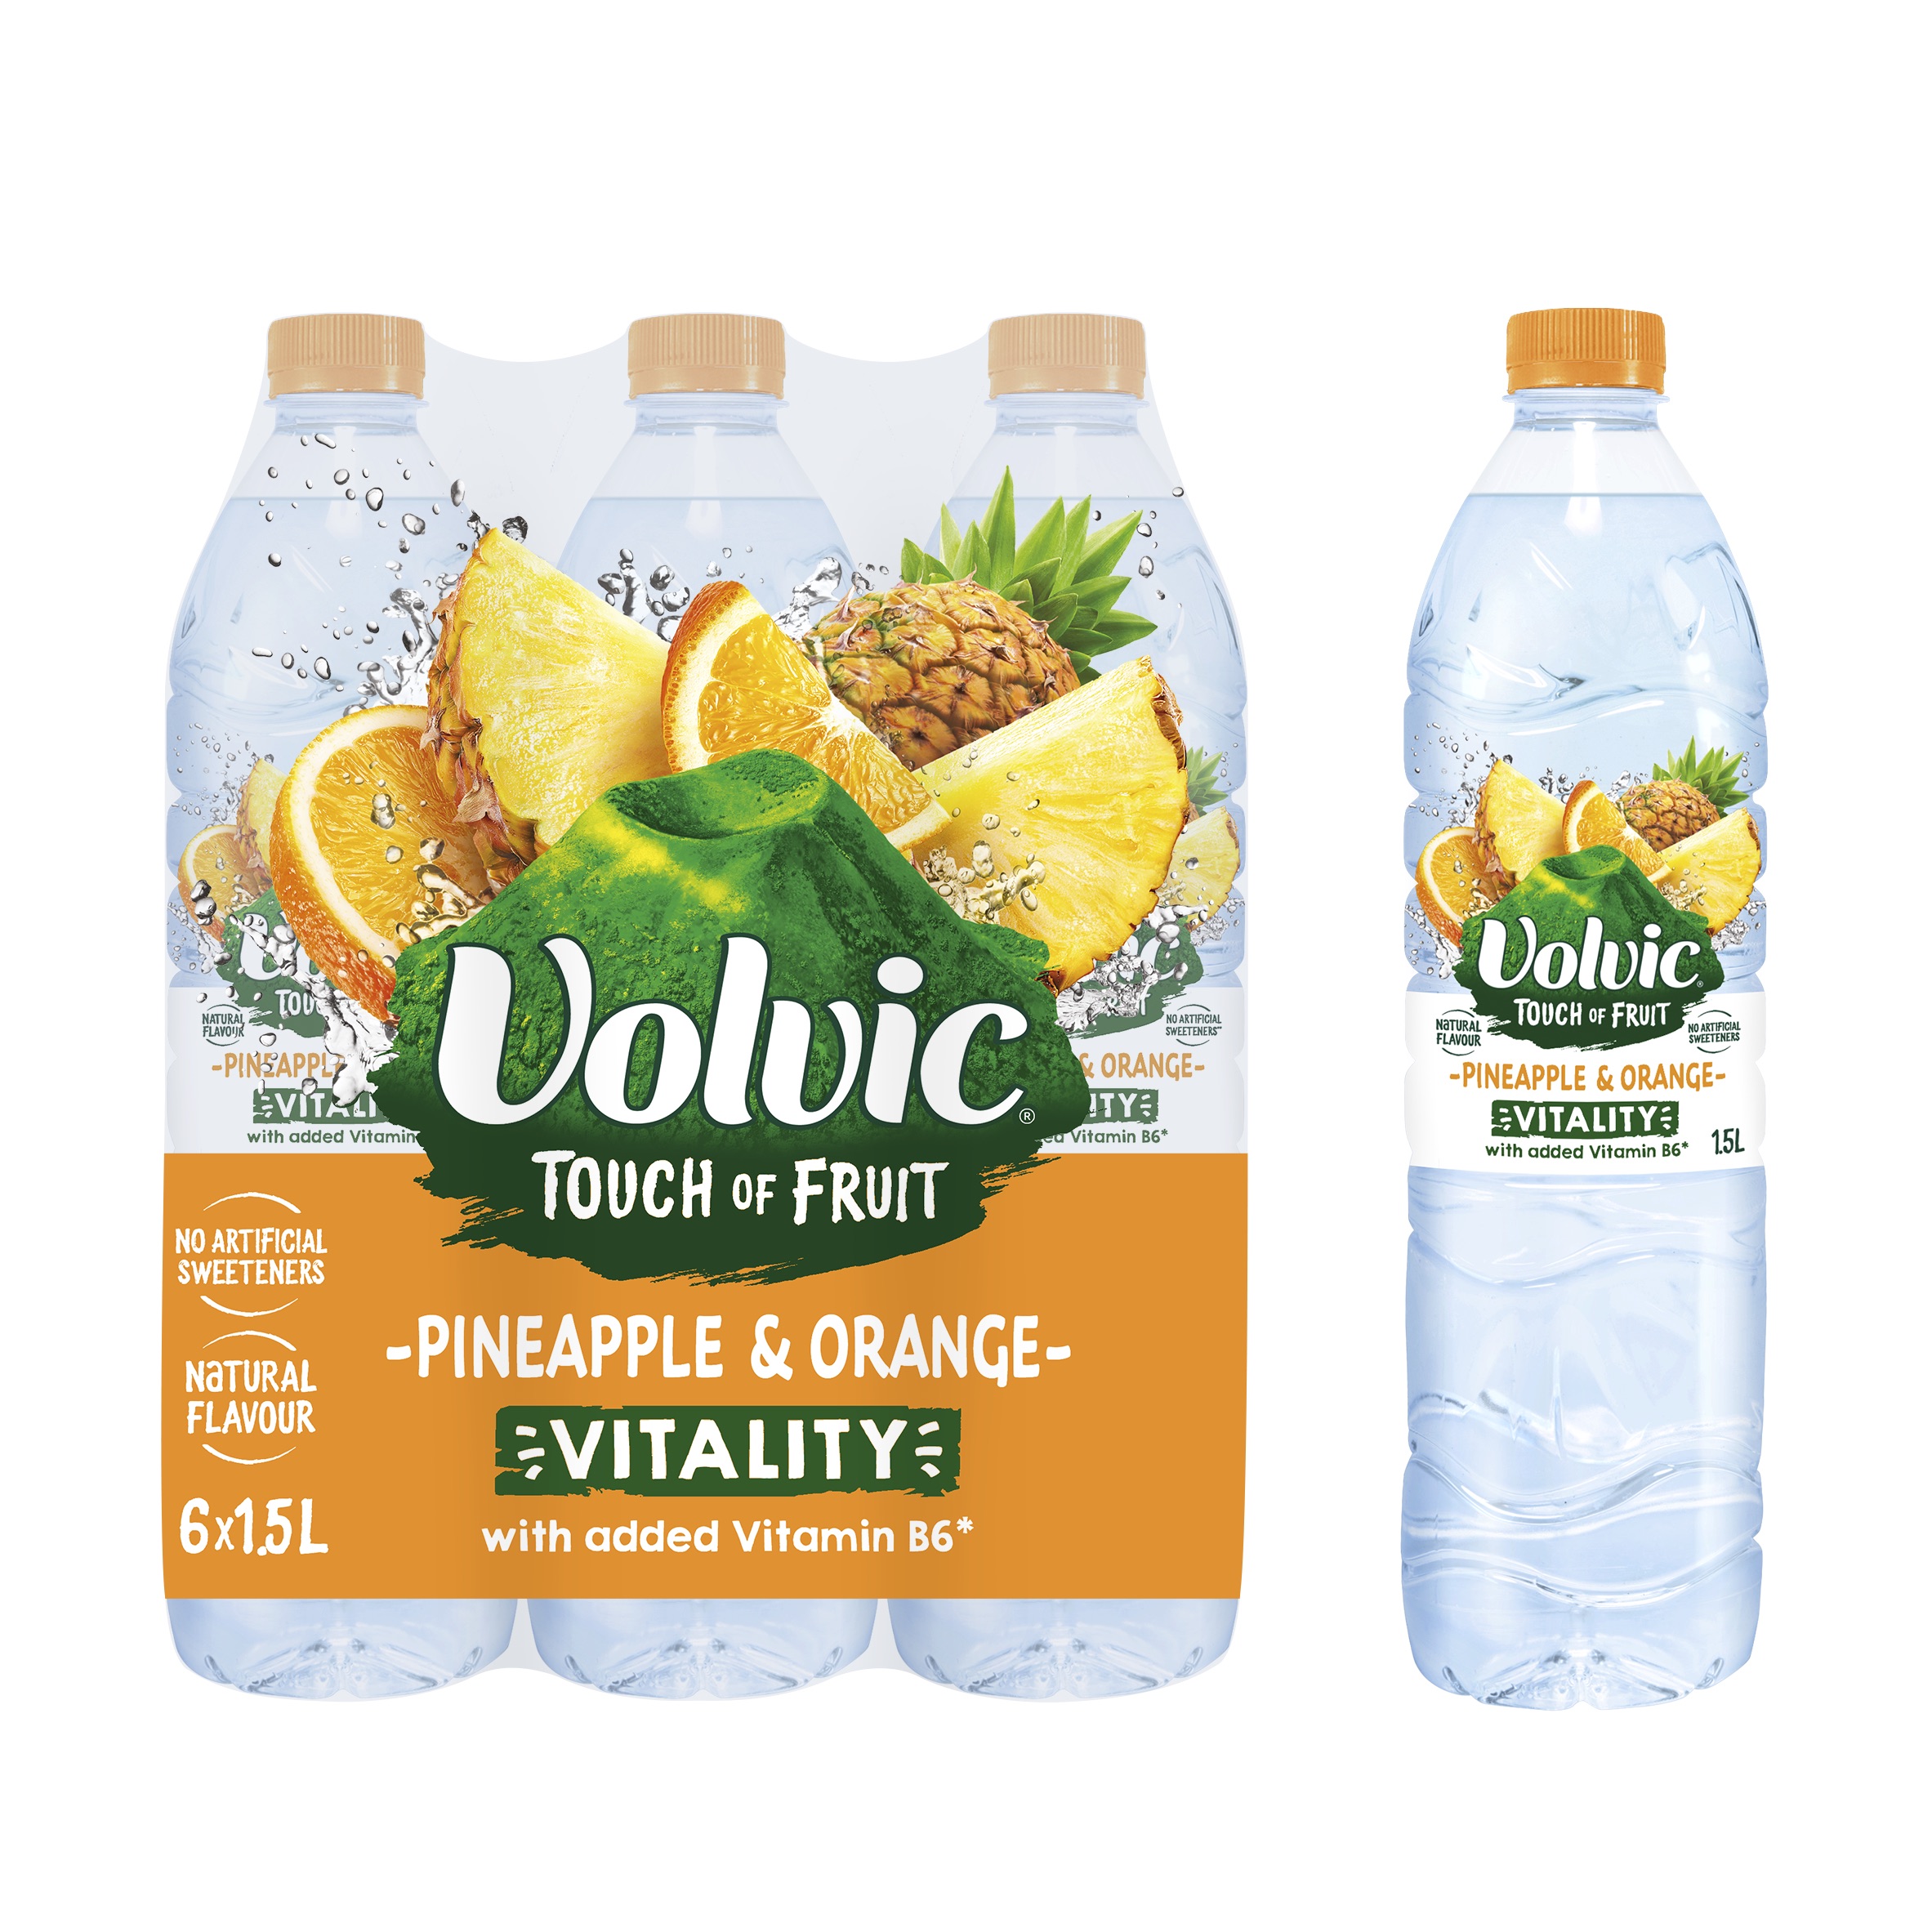 Volvic Touch Of Fruit launches new Pineapple and Orange flavour